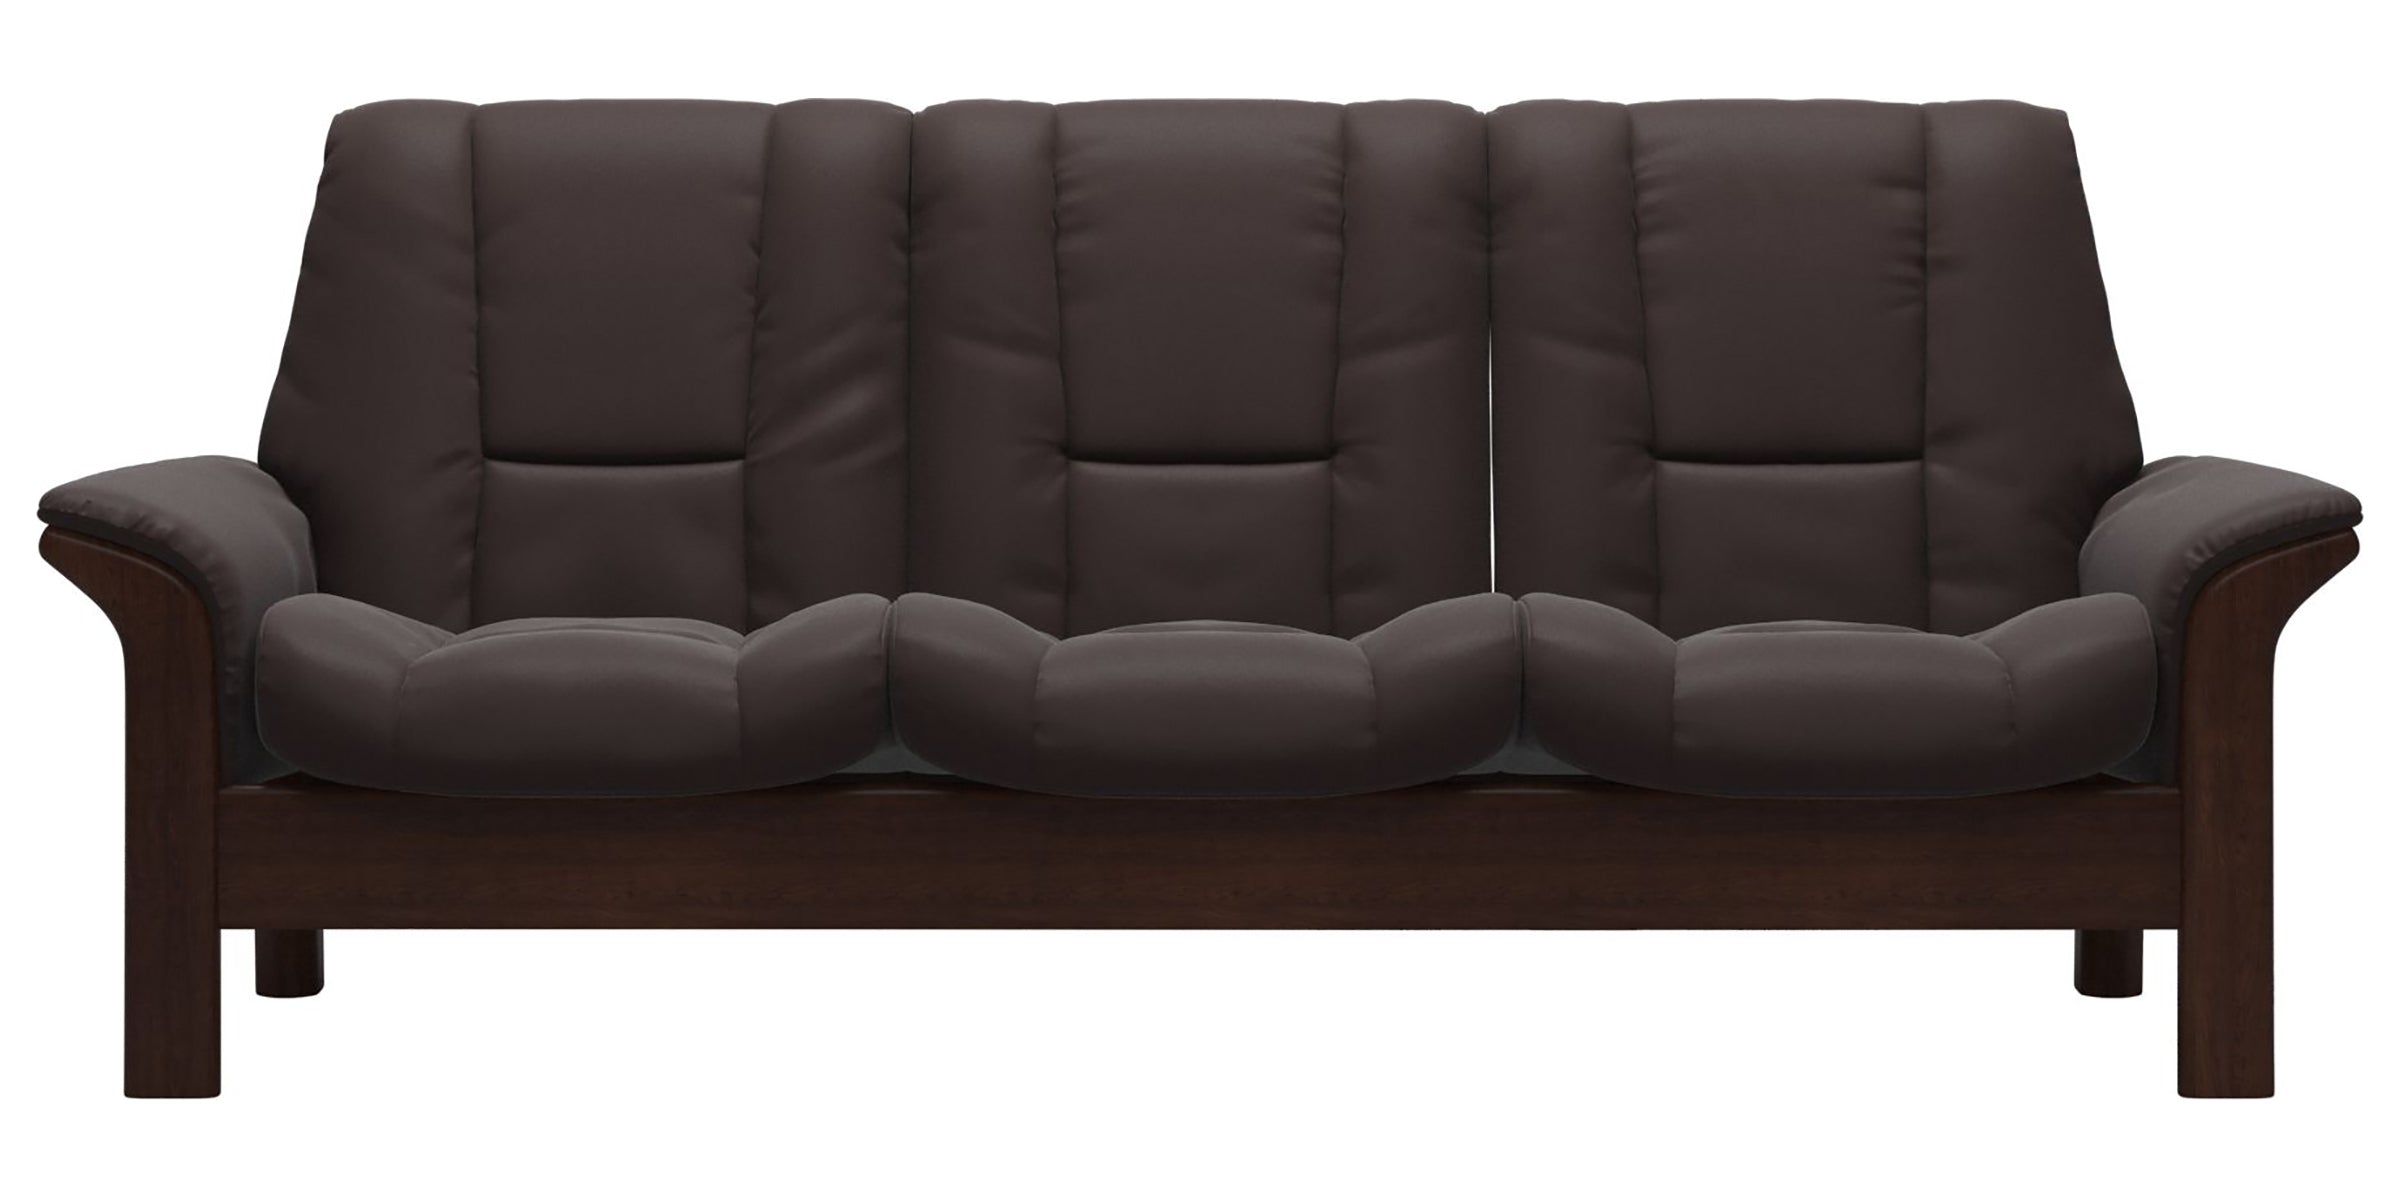 Paloma Leather Chocolate and Brown Base | Stressless Windsor 3-Seater Low Back Sofa | Valley Ridge Furniture